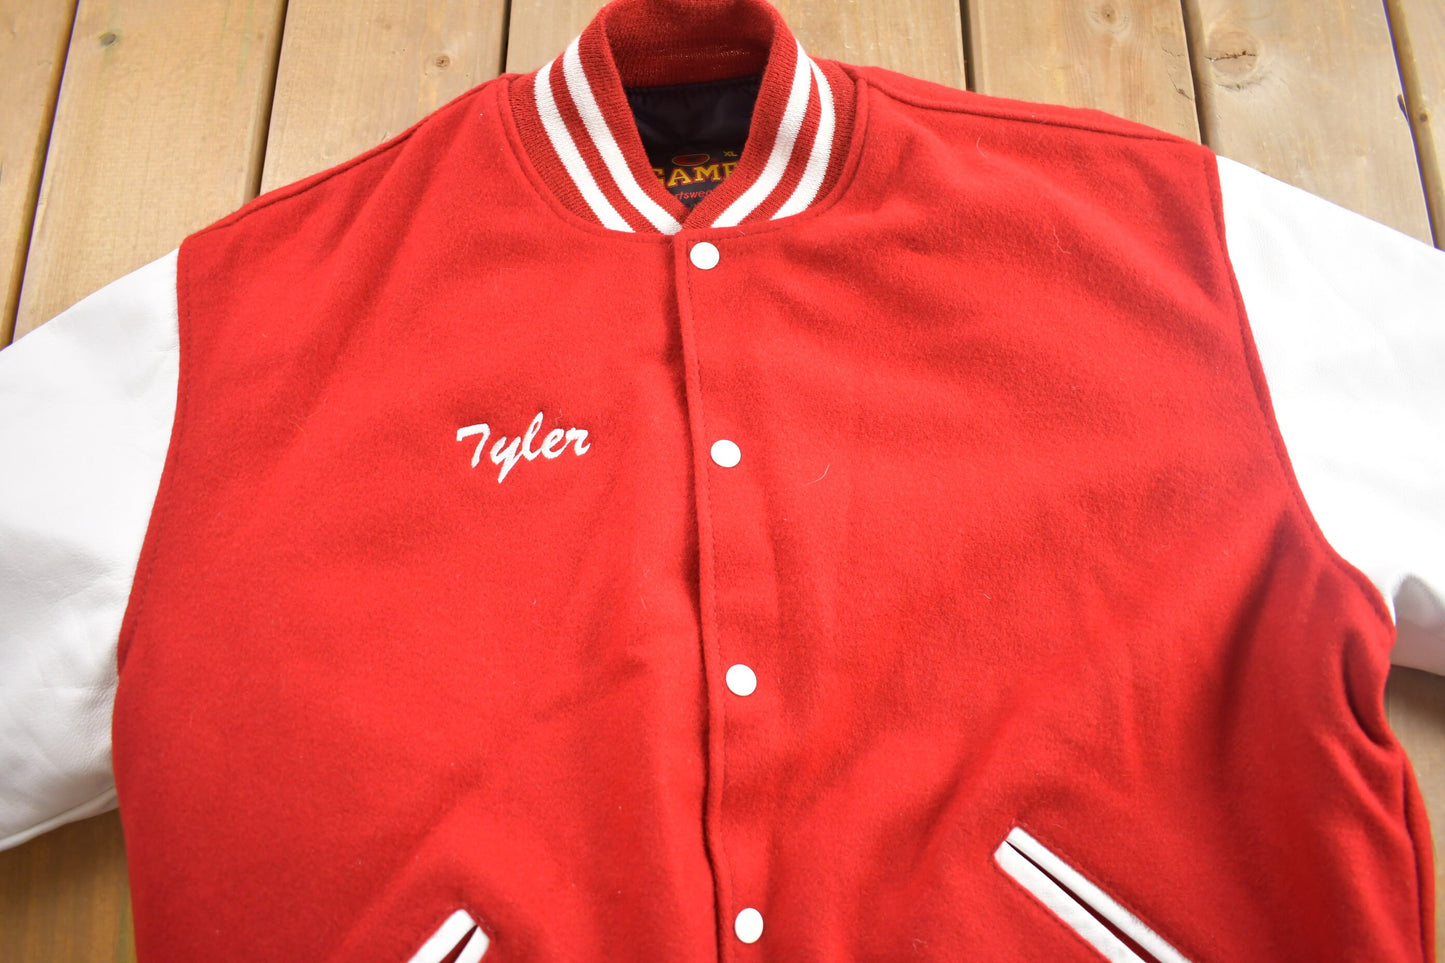 Vintage 1990s St Francis Soccer Leather Varsity Jacket / Made In USA / Red Varsity / Streetwear / Embroidered